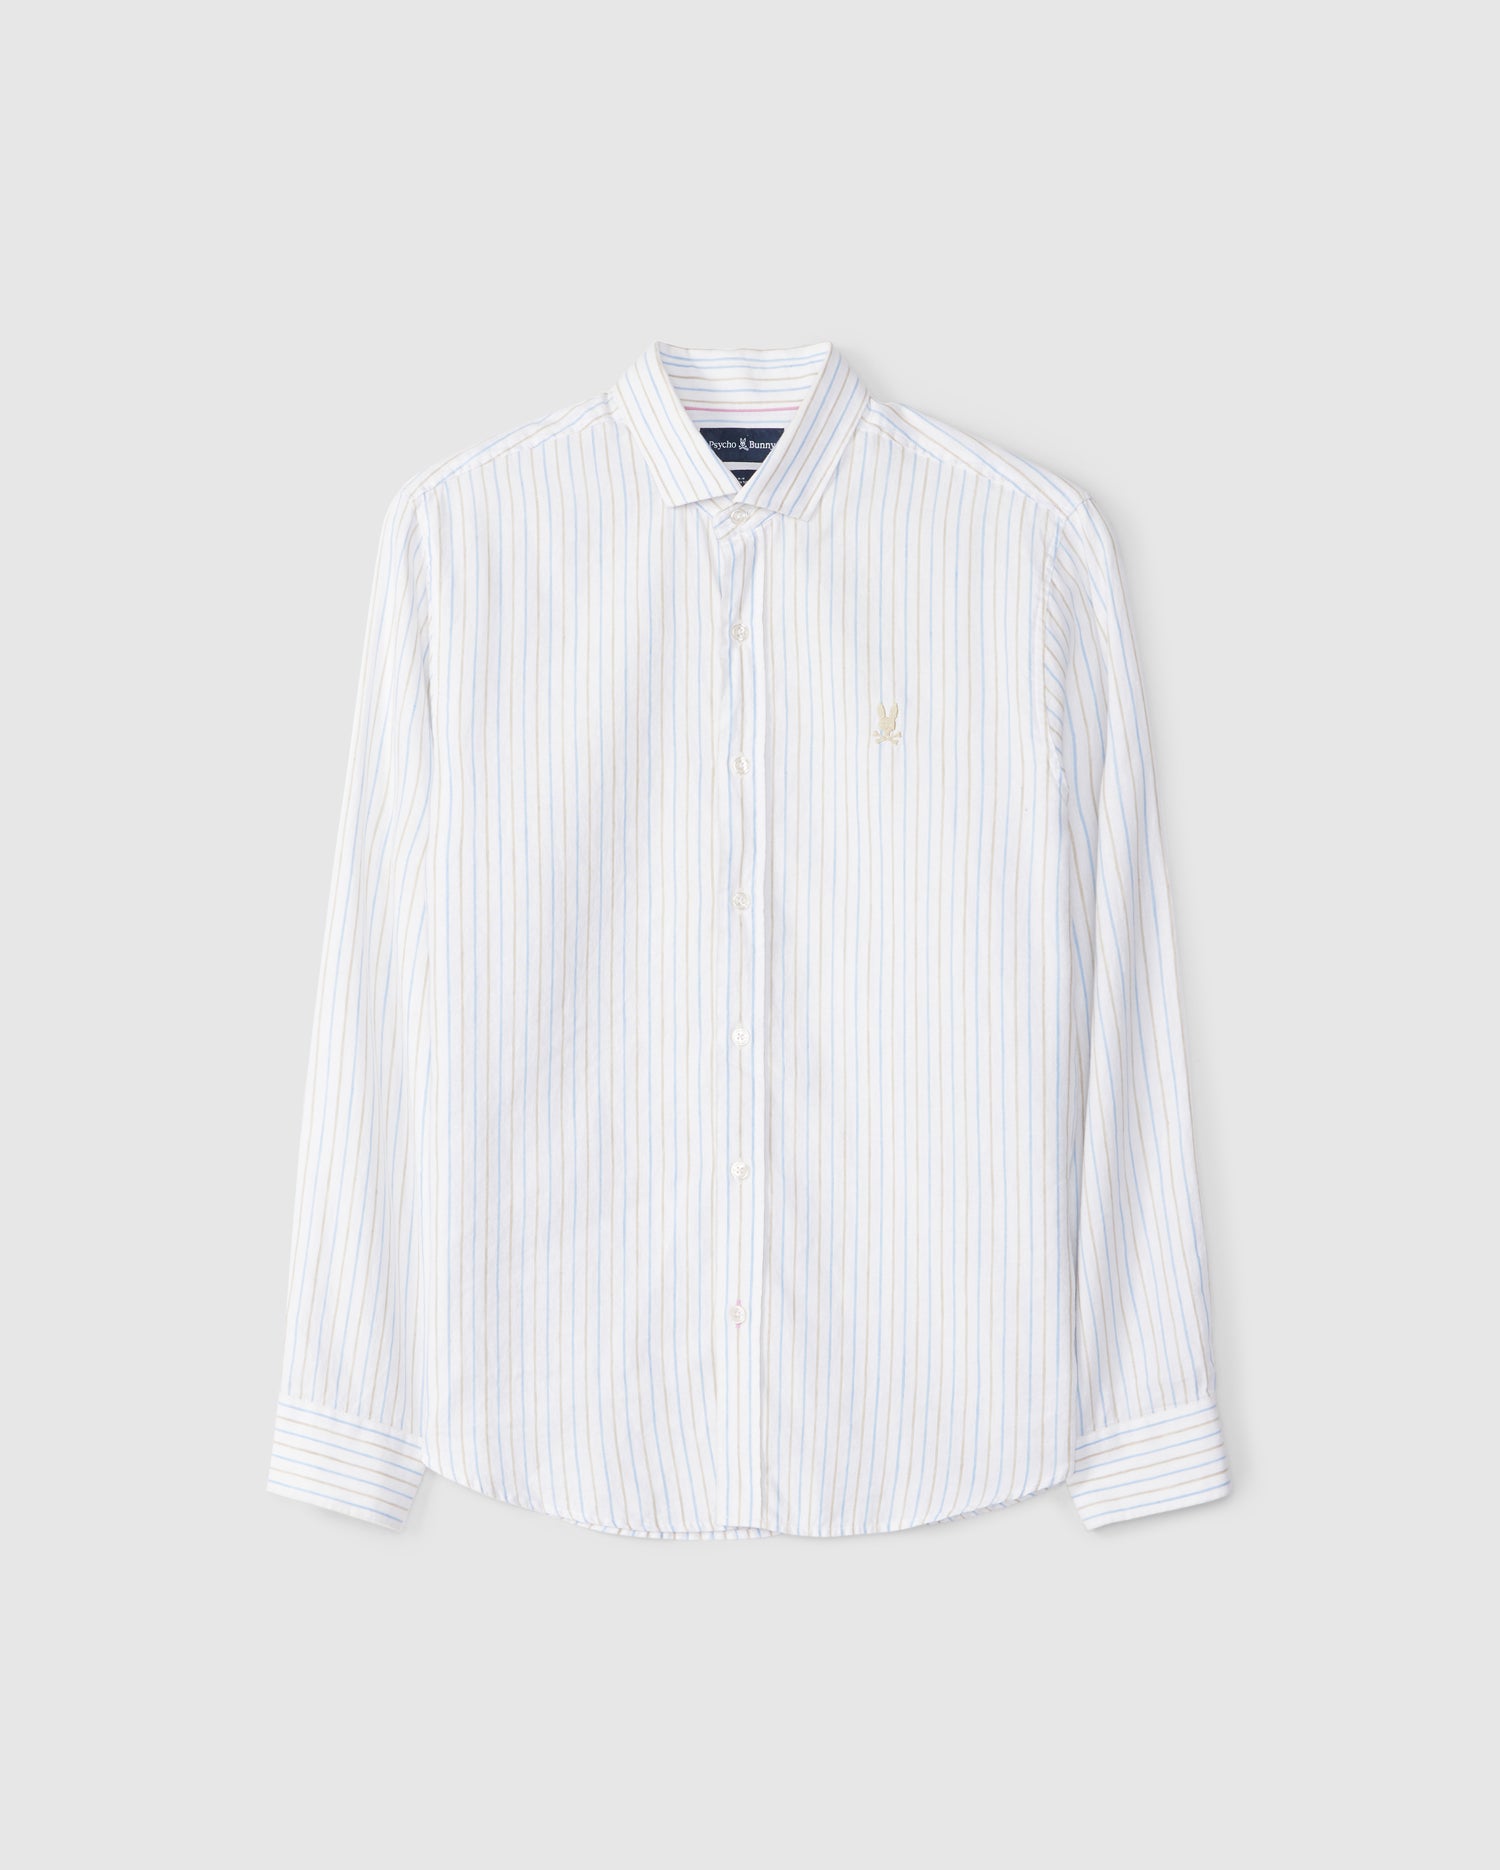 A Psycho Bunny MENS WEST LINEN LONG SLEEVE SHIRT - B6C587C200 with light blue vertical stripes, featuring long sleeves and a small embroidered logo on the left chest. The striped shirt has a classic collar and is neatly arranged against a plain, light gray background.